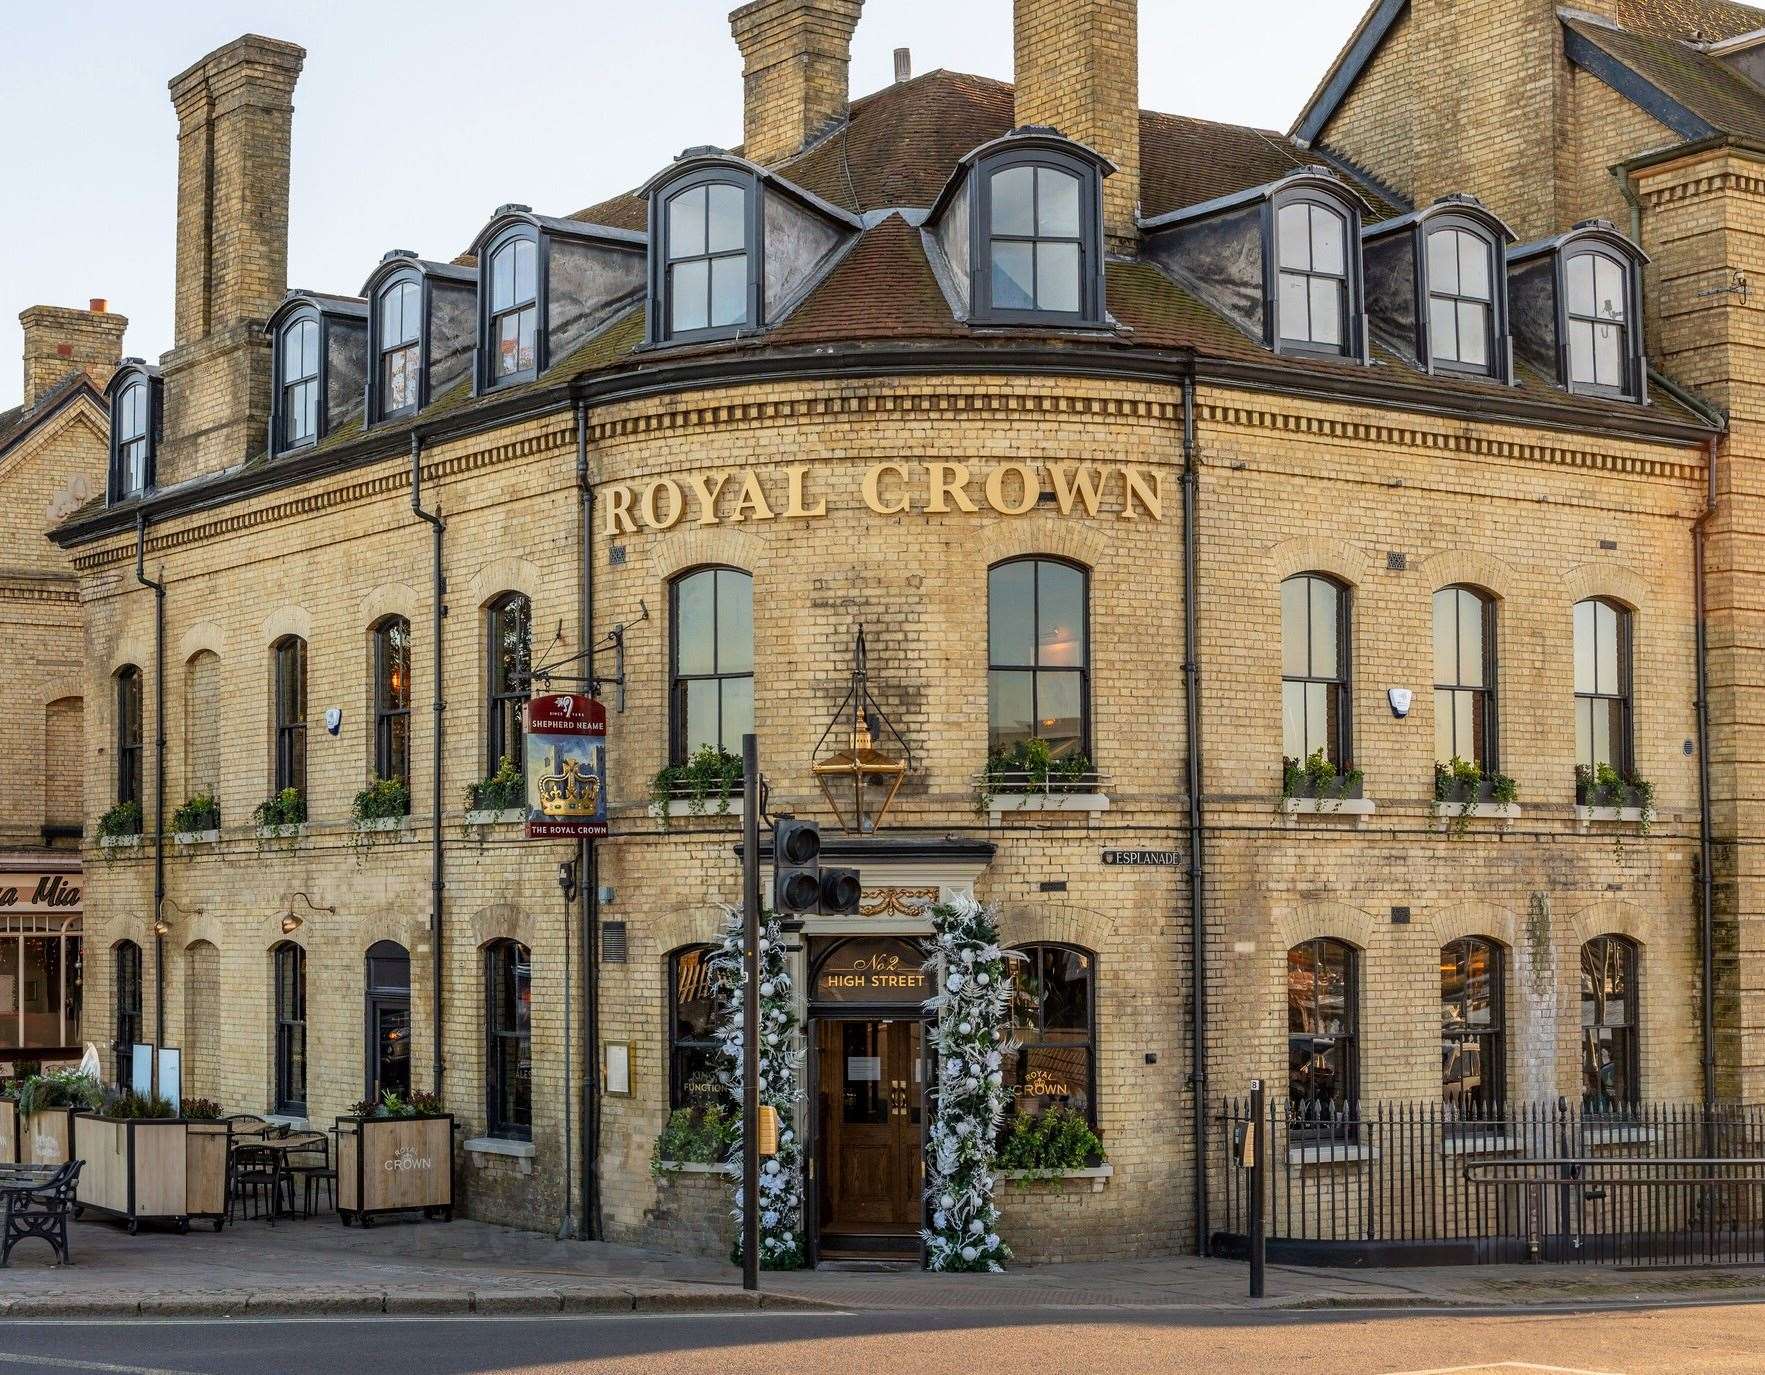 The Royal Crown has a majestic new look